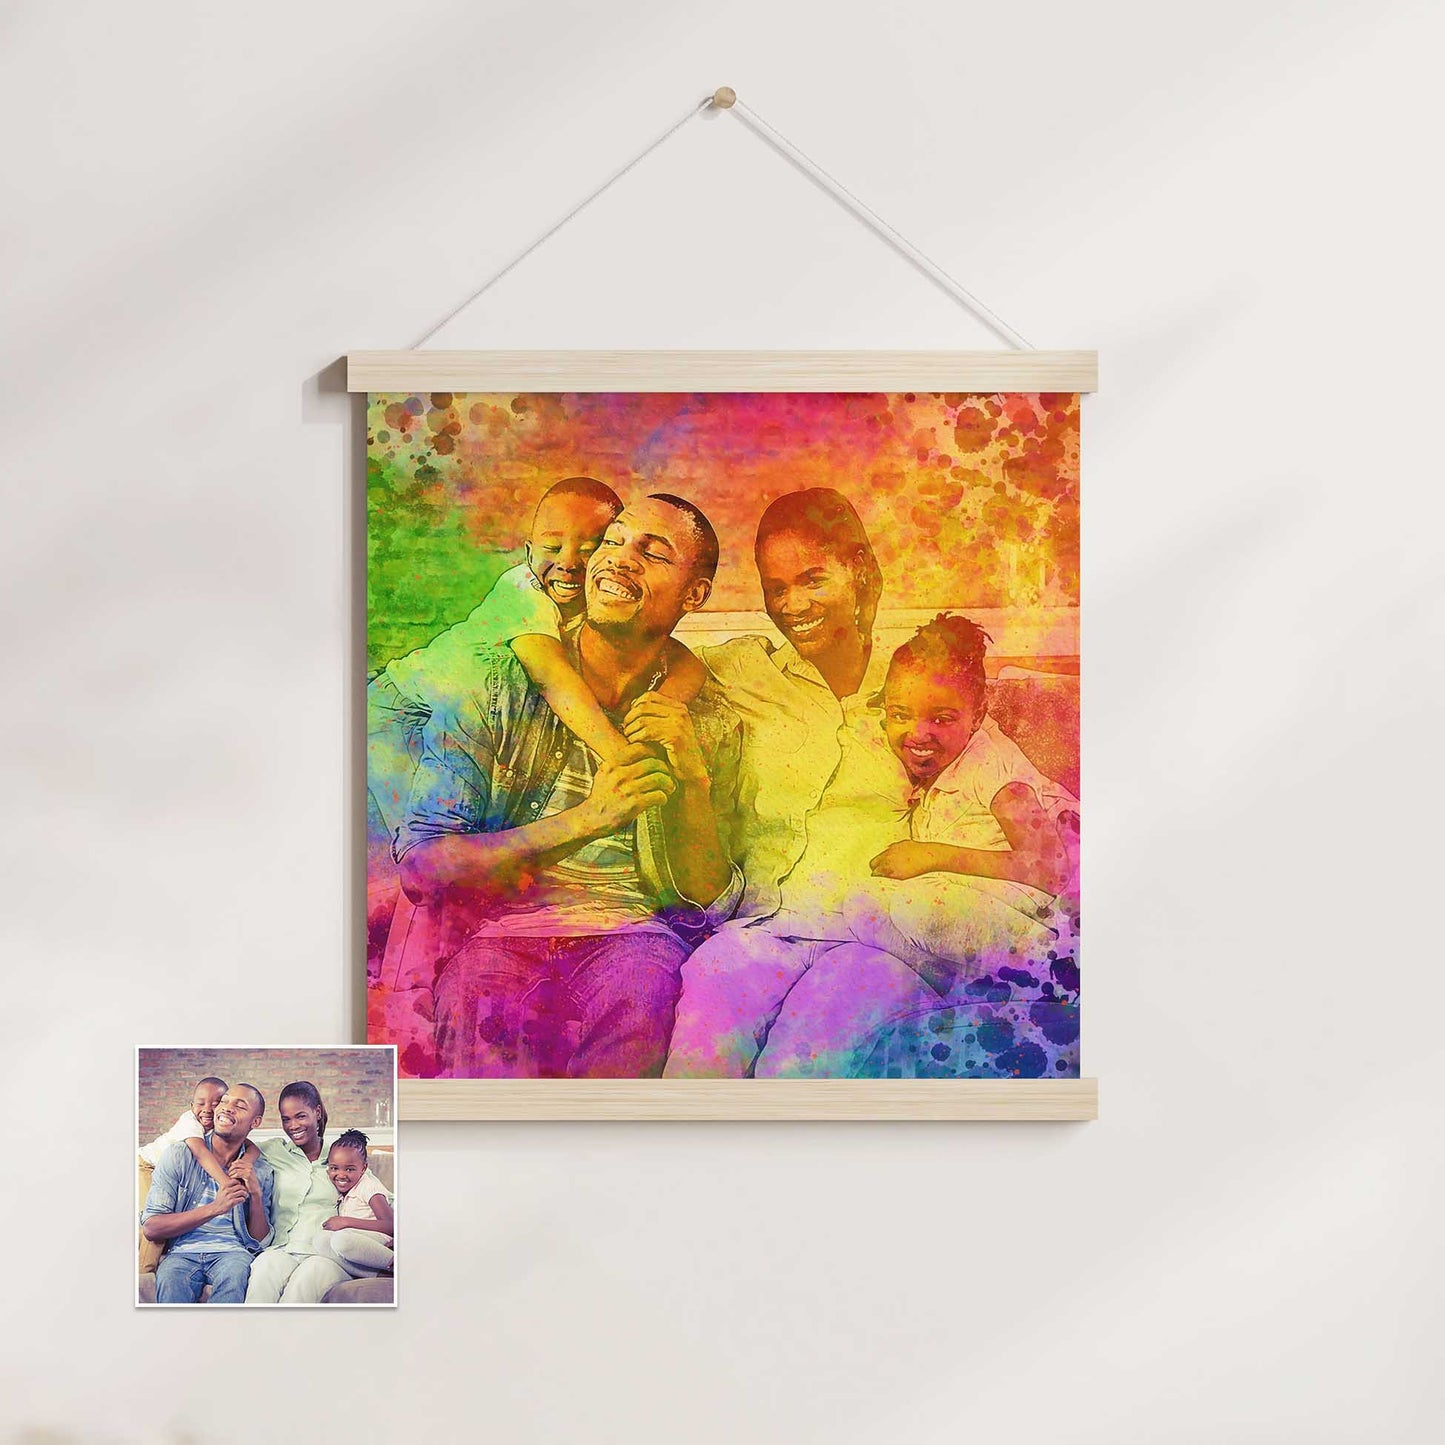 Add a pop of color and excitement to your walls with our Personalised Color Splash Poster Hanger. The dynamic paint splash effect creates a vivid and playful look, while the gallery-quality paper ensures the artwork's exceptional quality